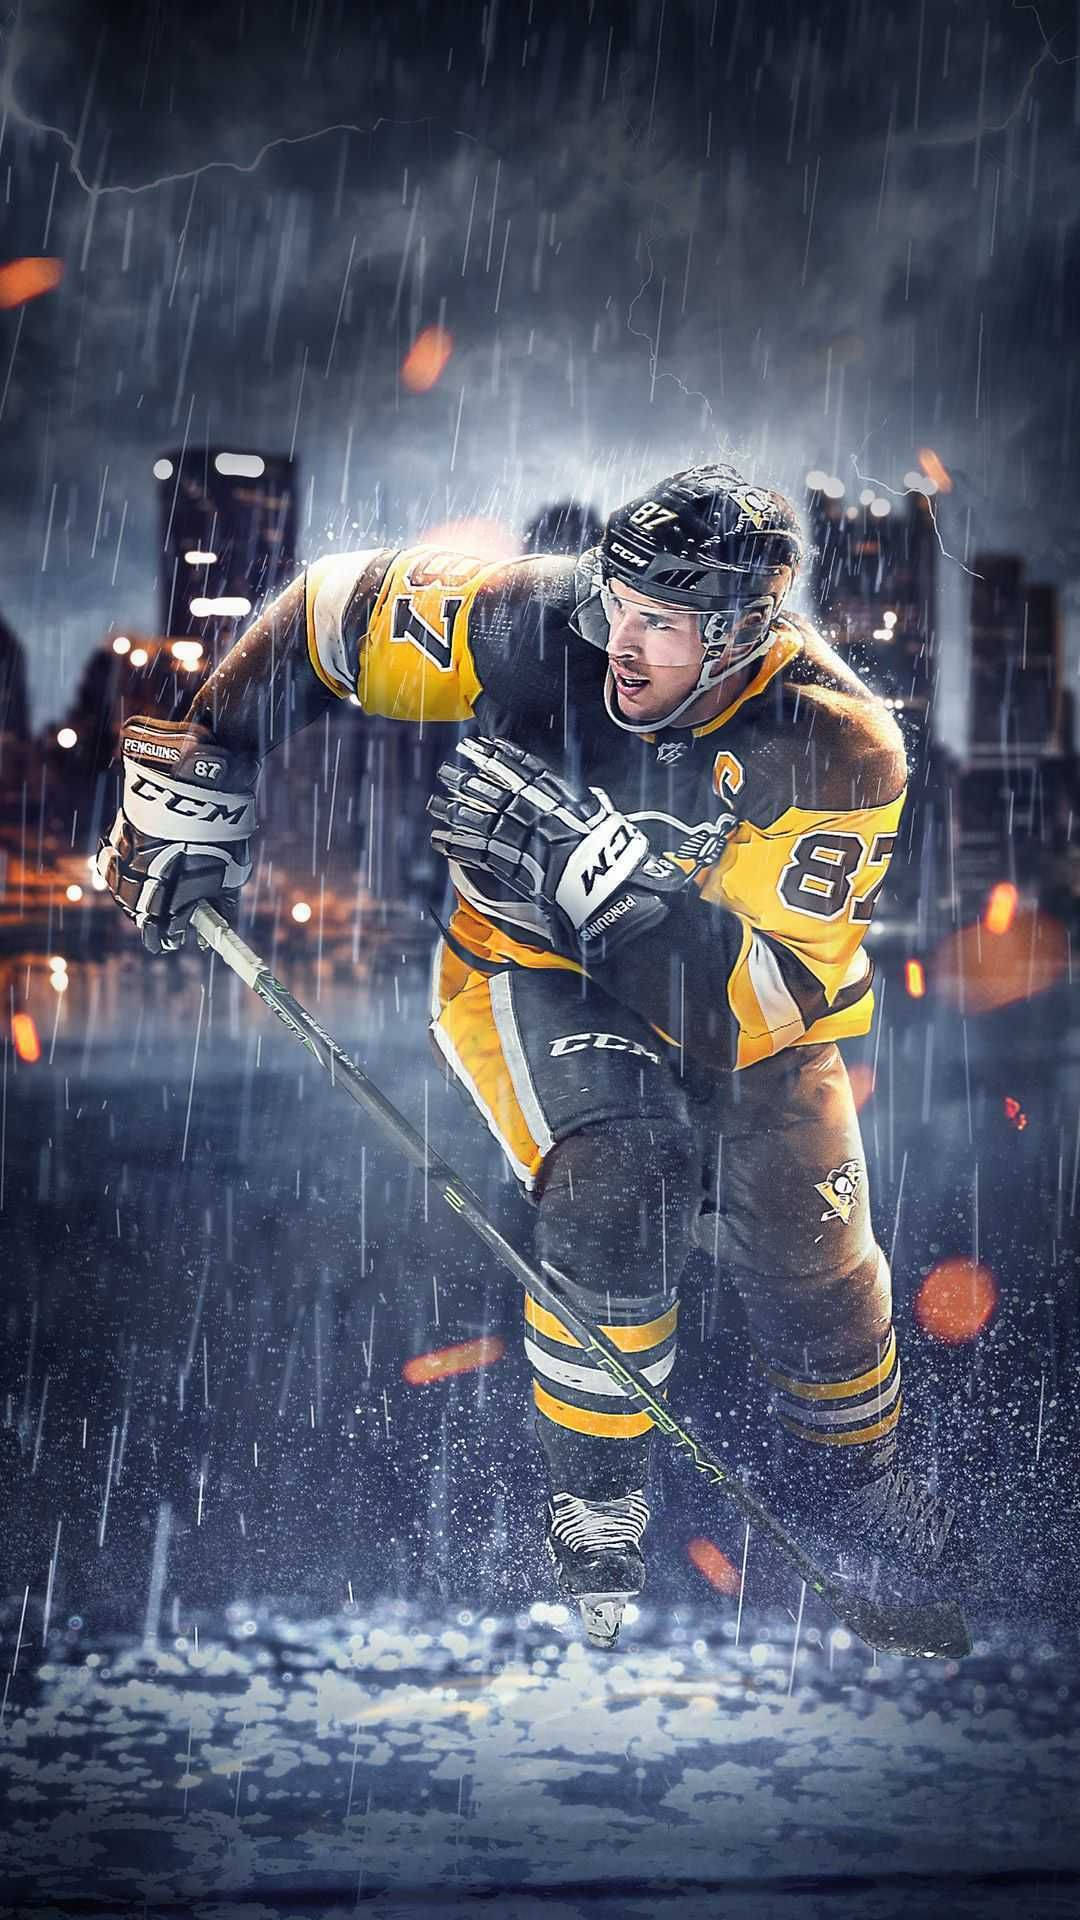 Download A Hockey Player Is Playing On Ice With A Cloudy Sky